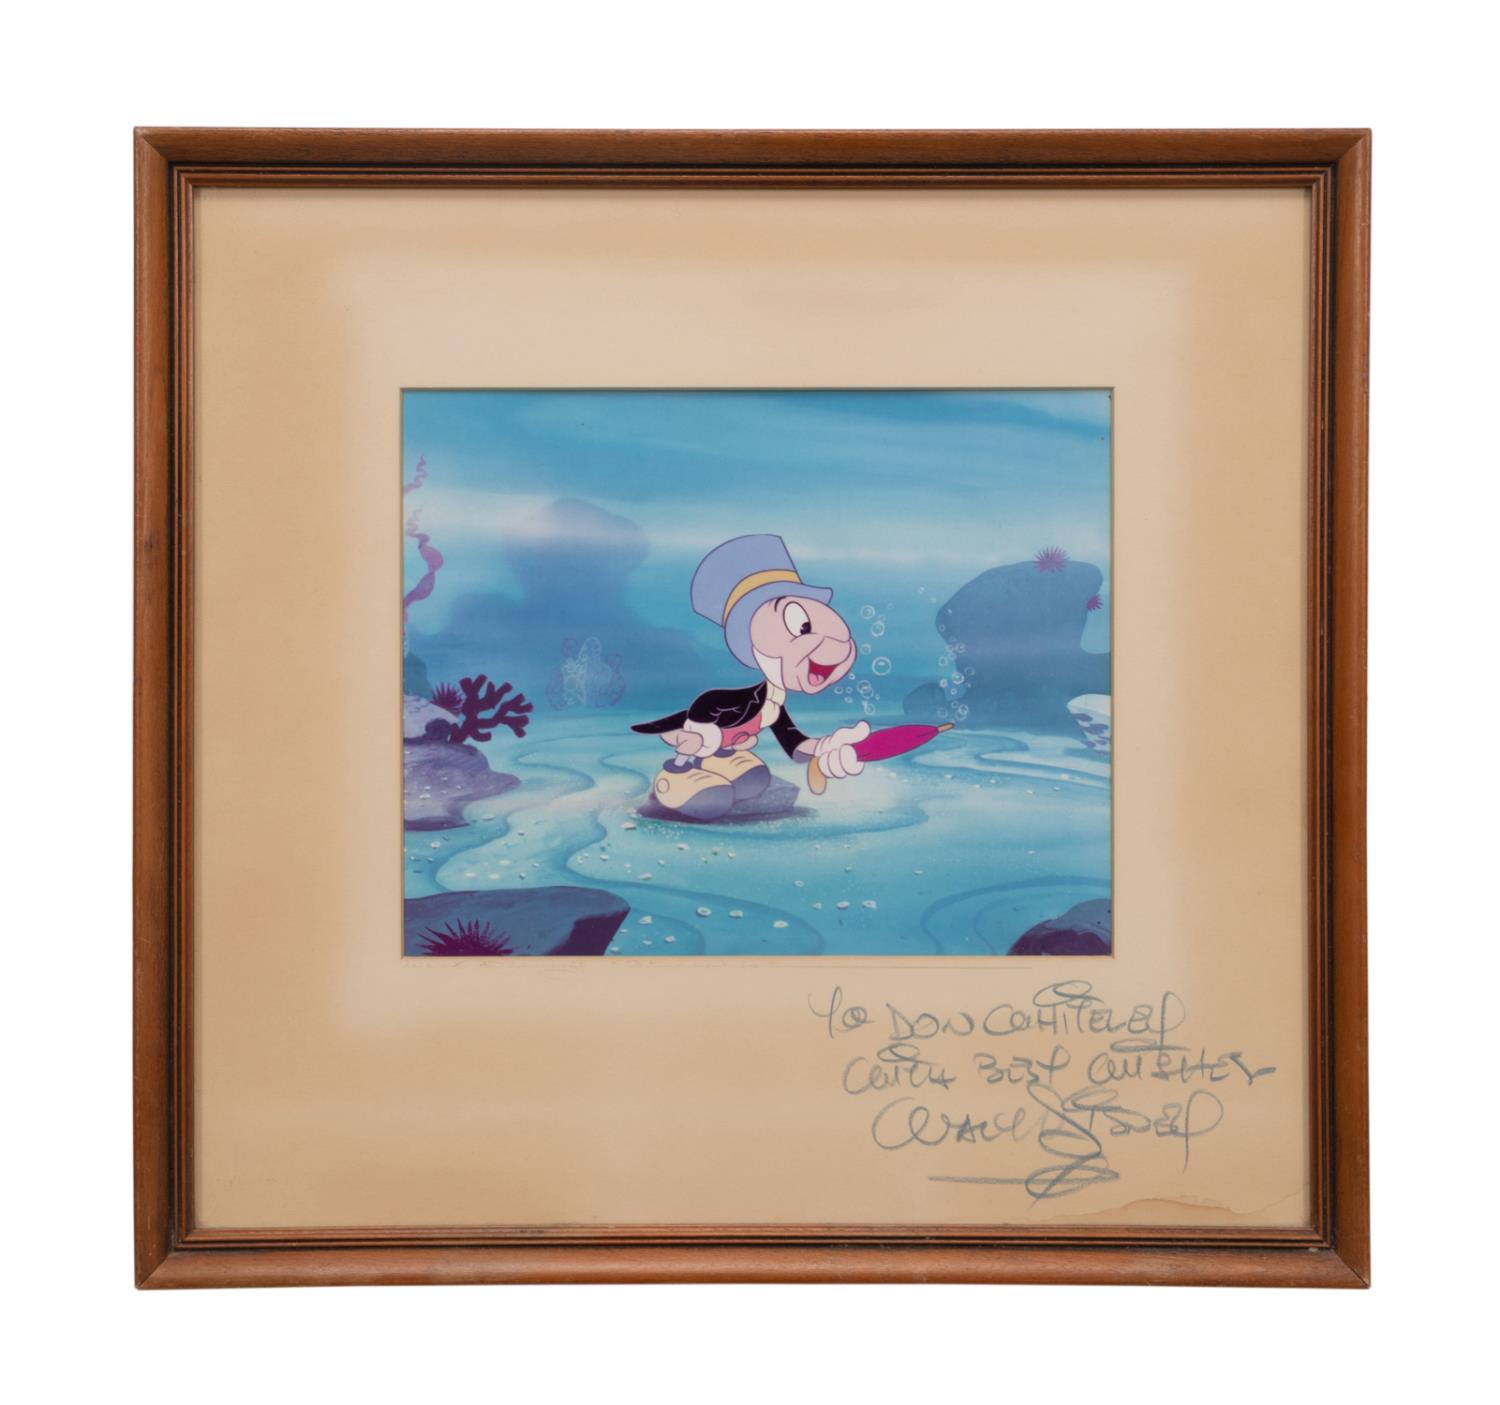 DISNEY PRODUCTION CEL SIGNED BY 3cd91f